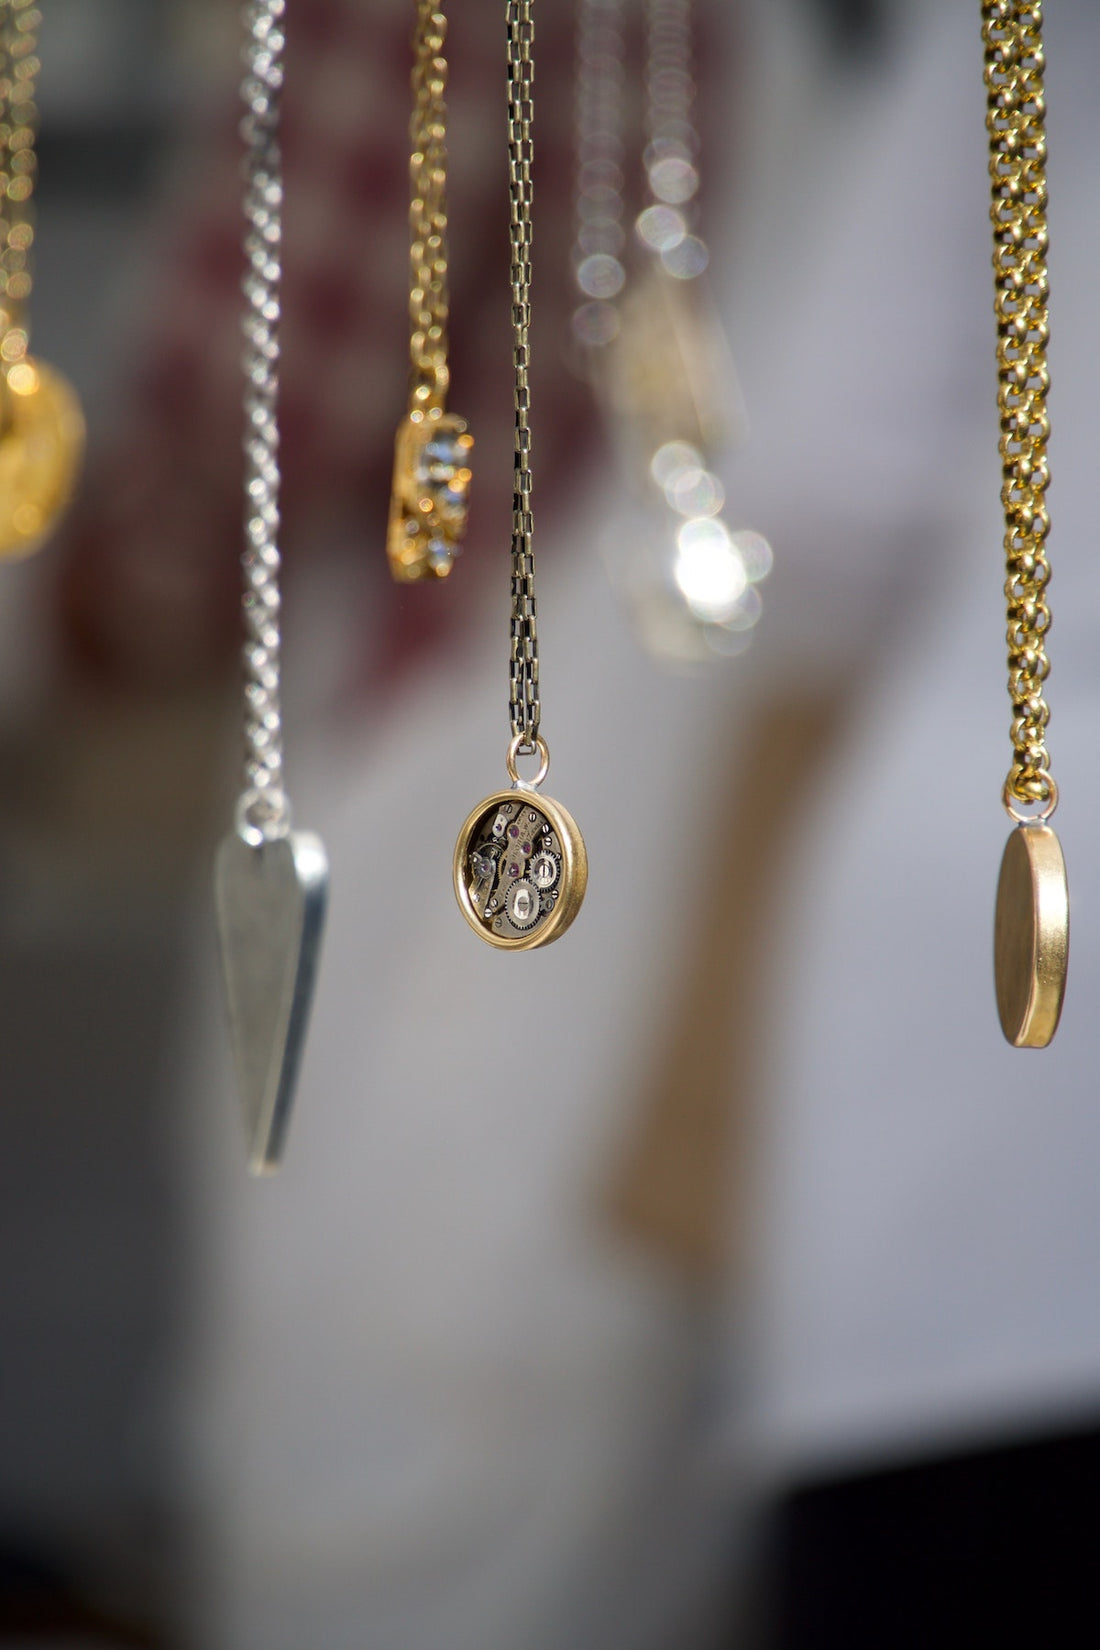 Personalized Jewelry Options According to your Zodiac Sign